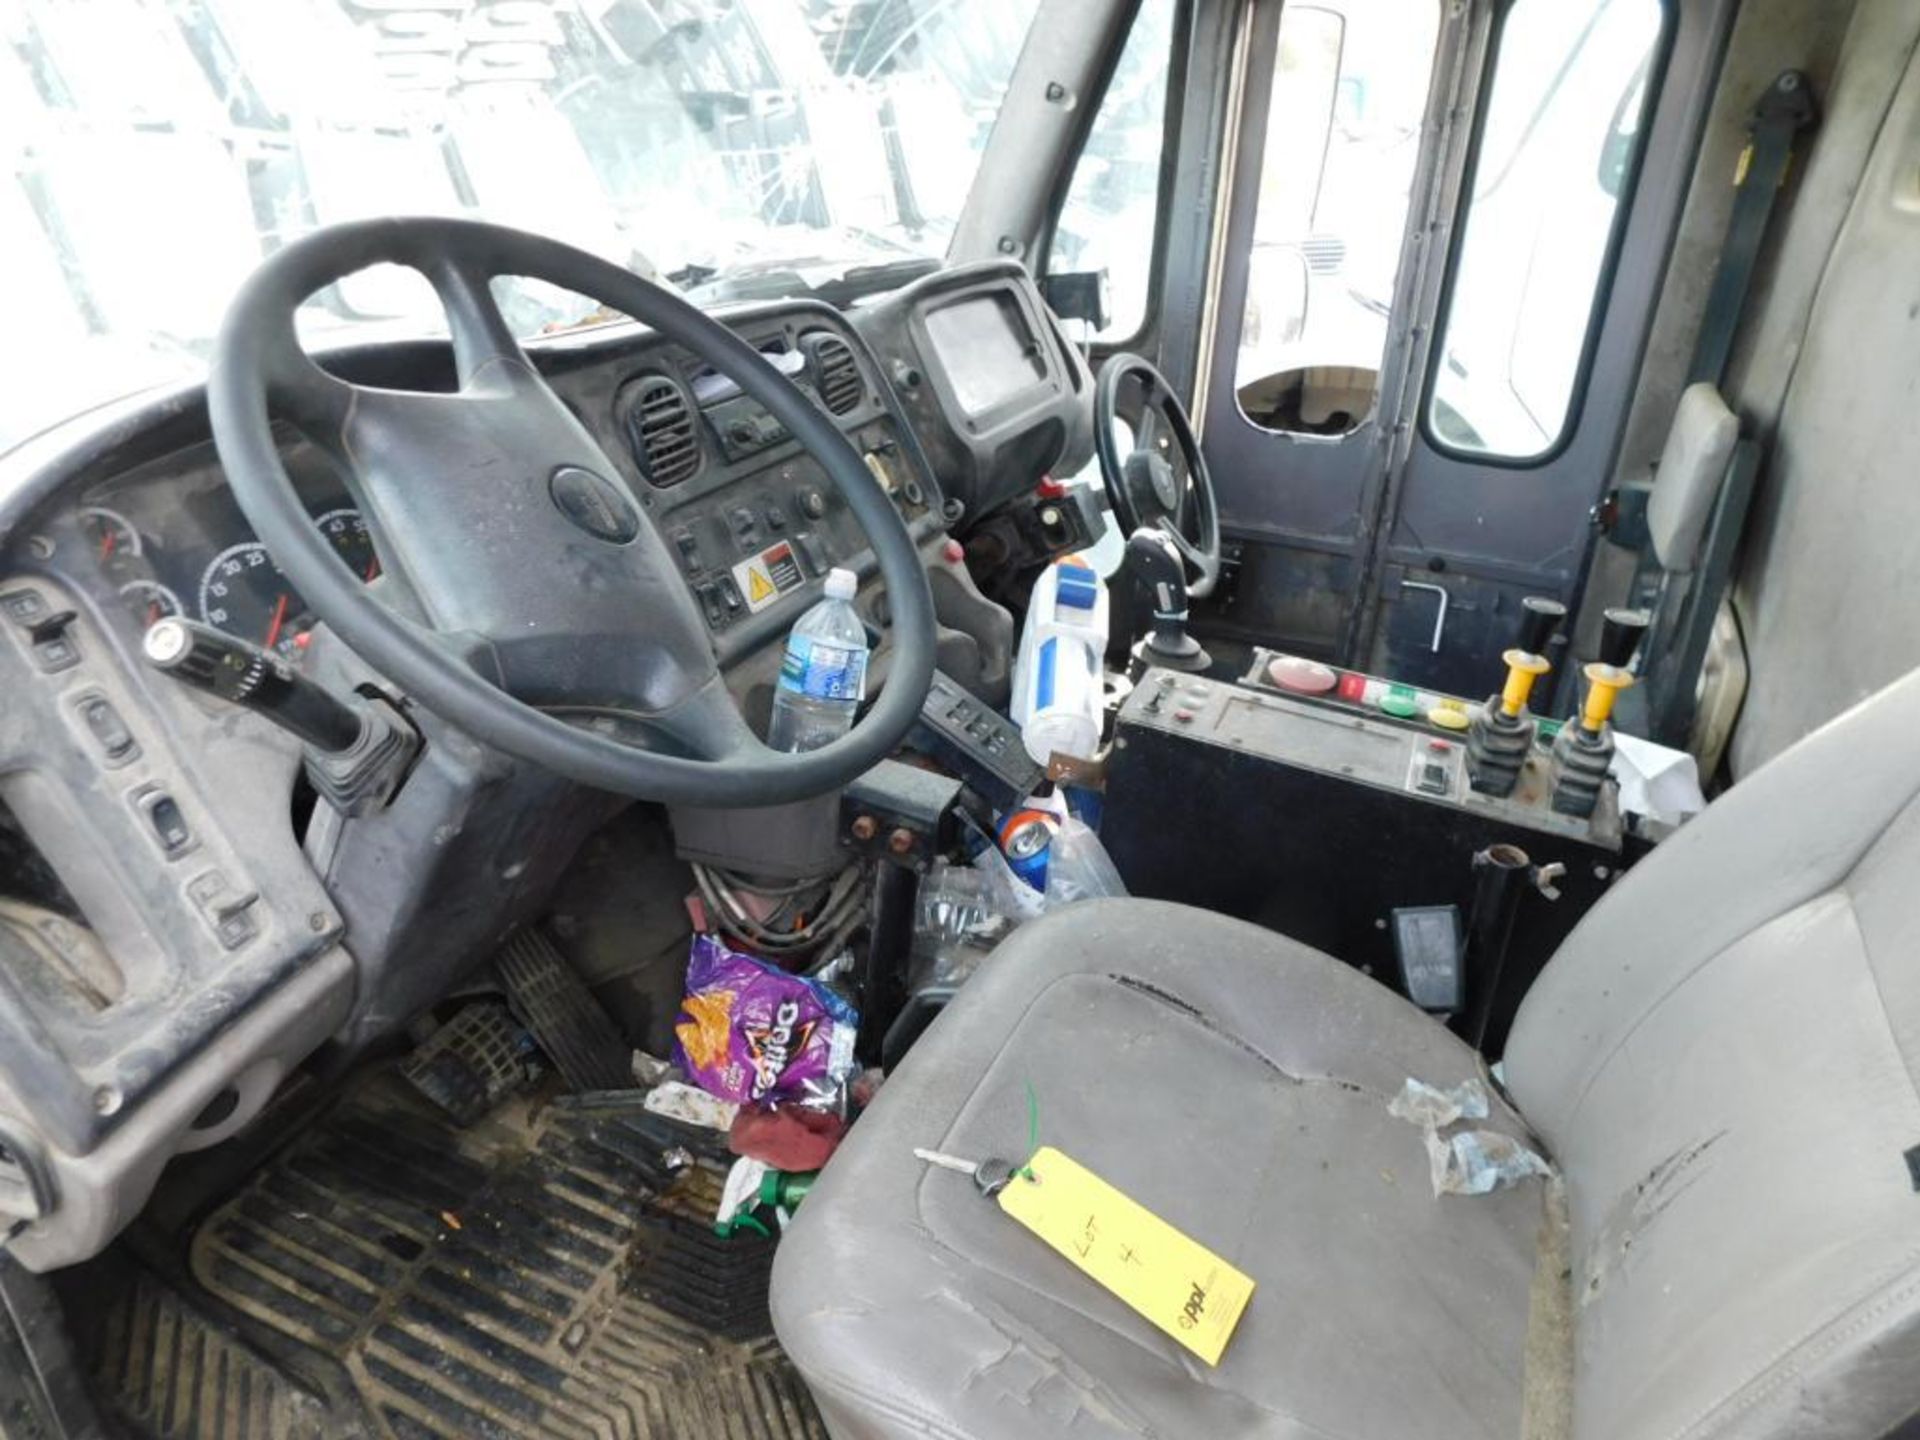 2009 Freightliner T.A. Automated Side Loader Garbage Truck Model Business Class M2, VIN - Image 24 of 26